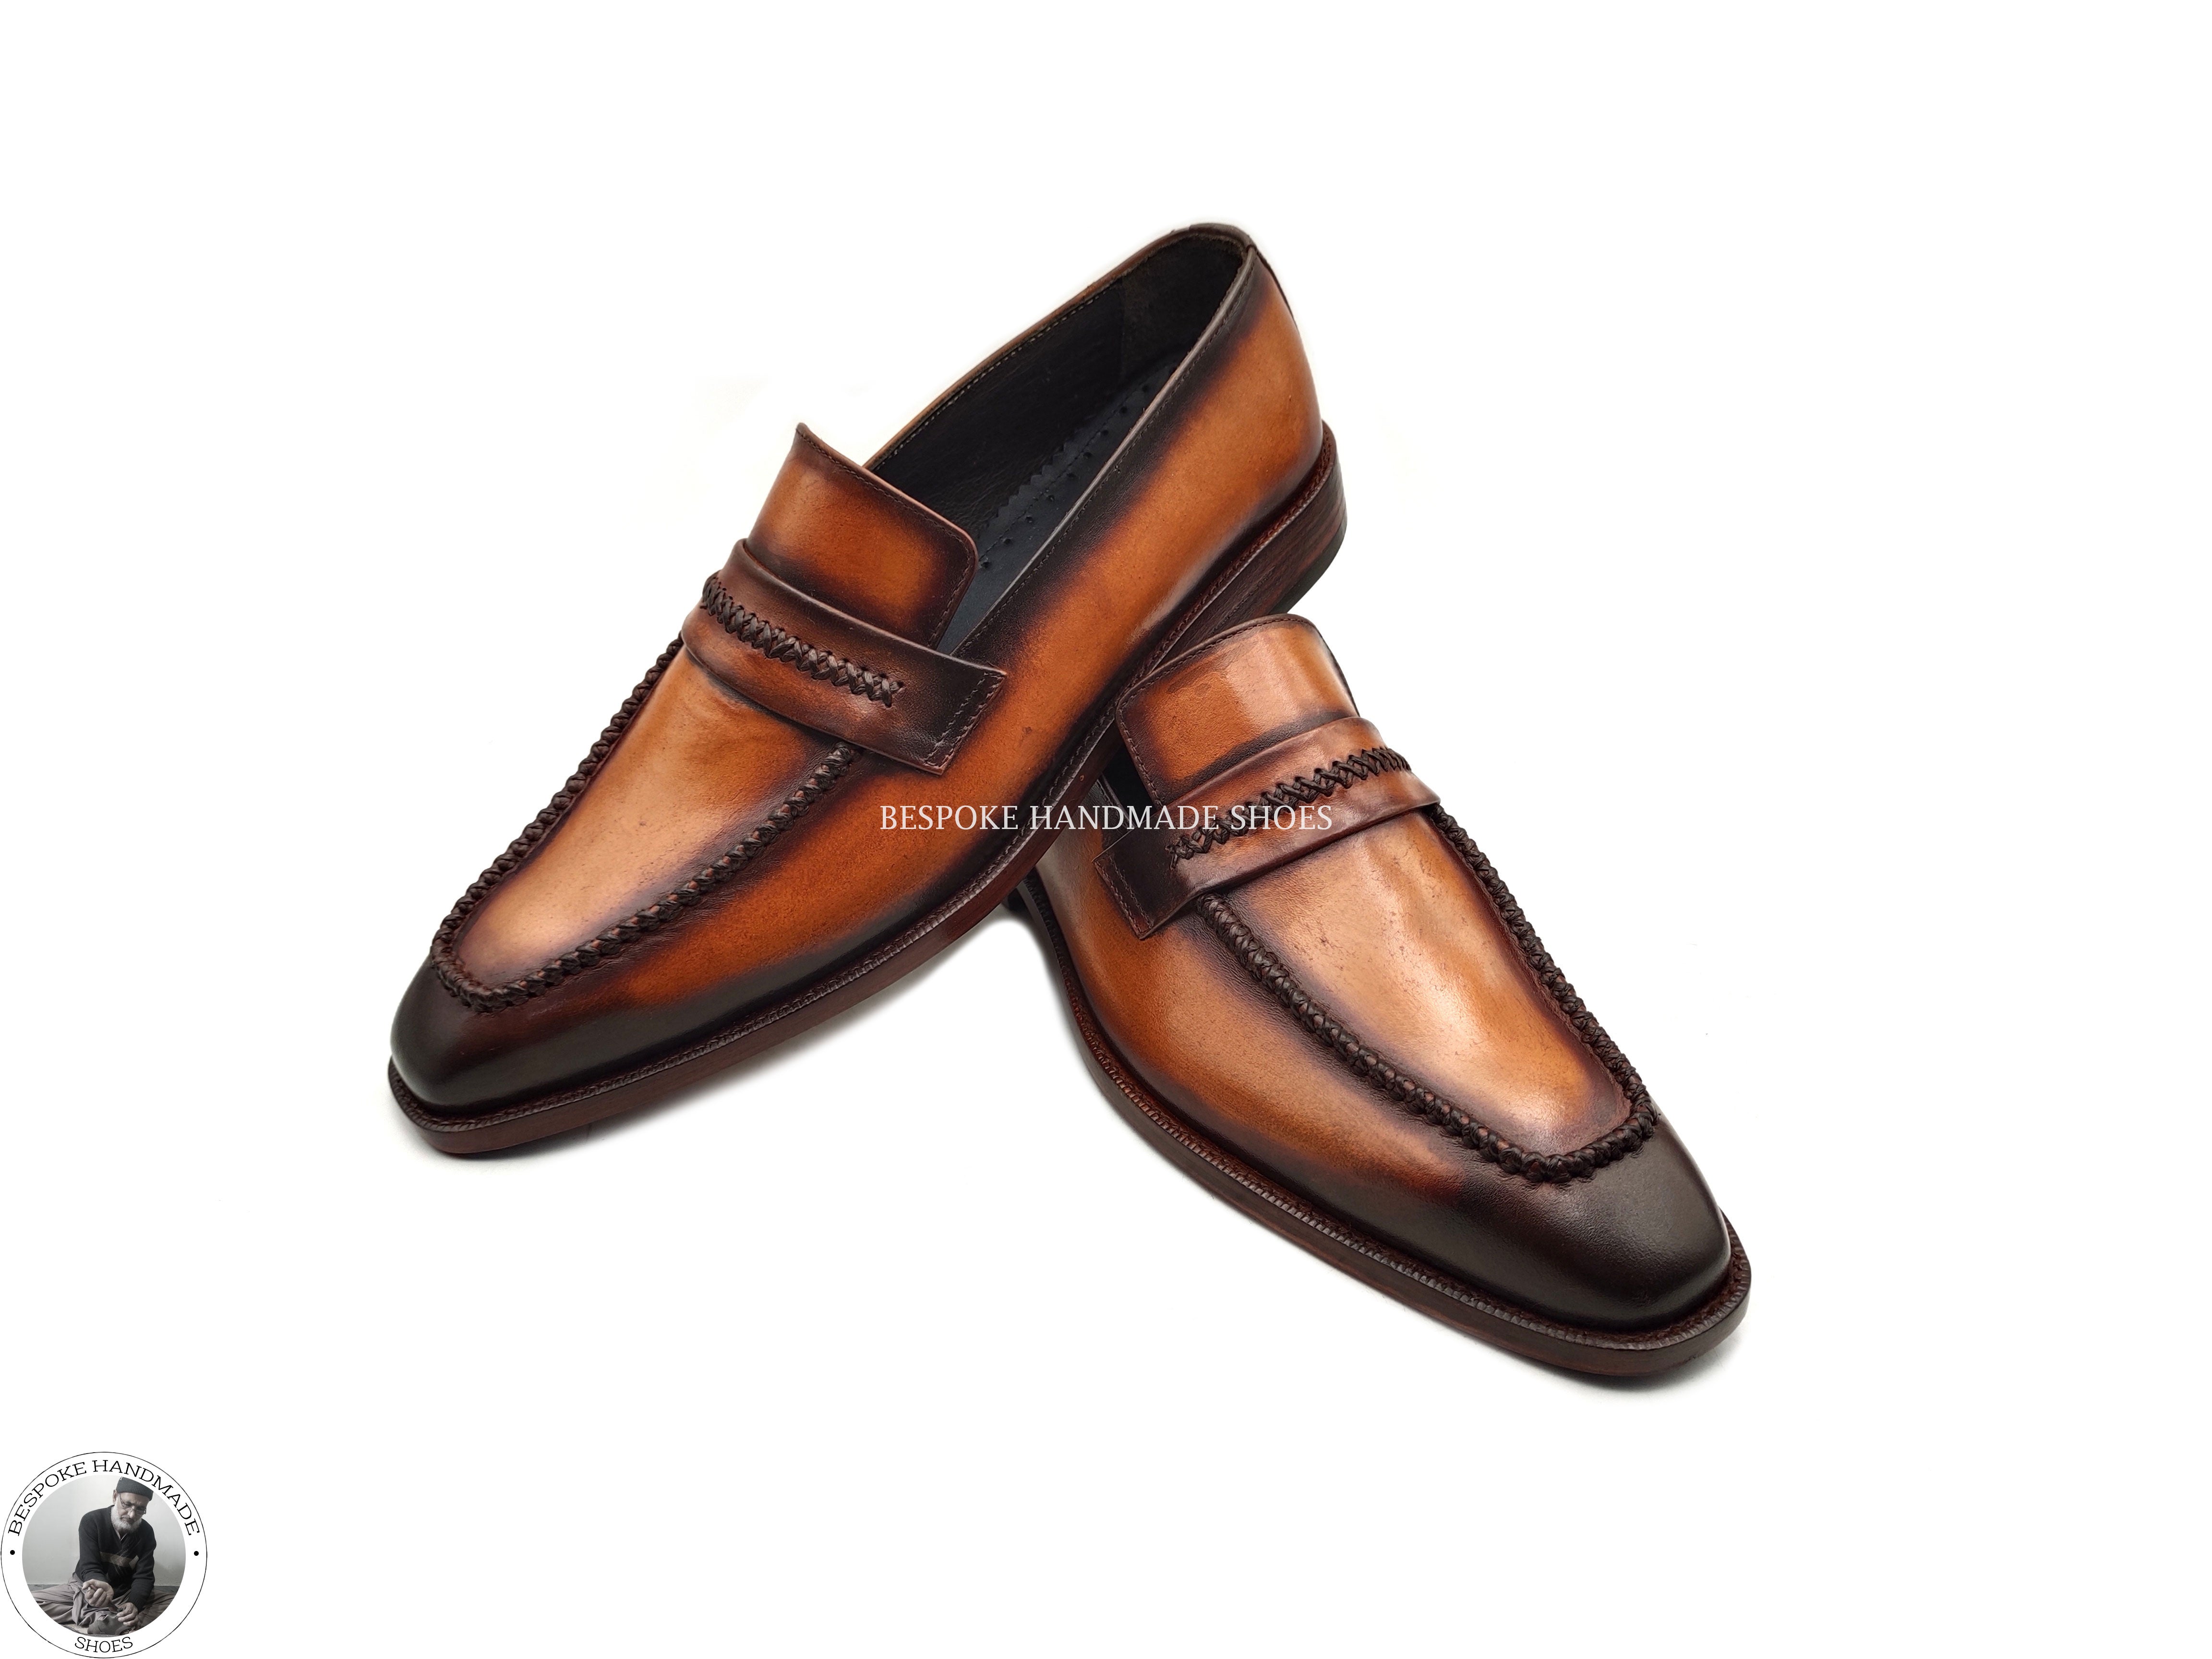 Handmade Men’s Formal Business Comfortable Brown Leather Bit Black Shaded Loafer moccasian Shoes